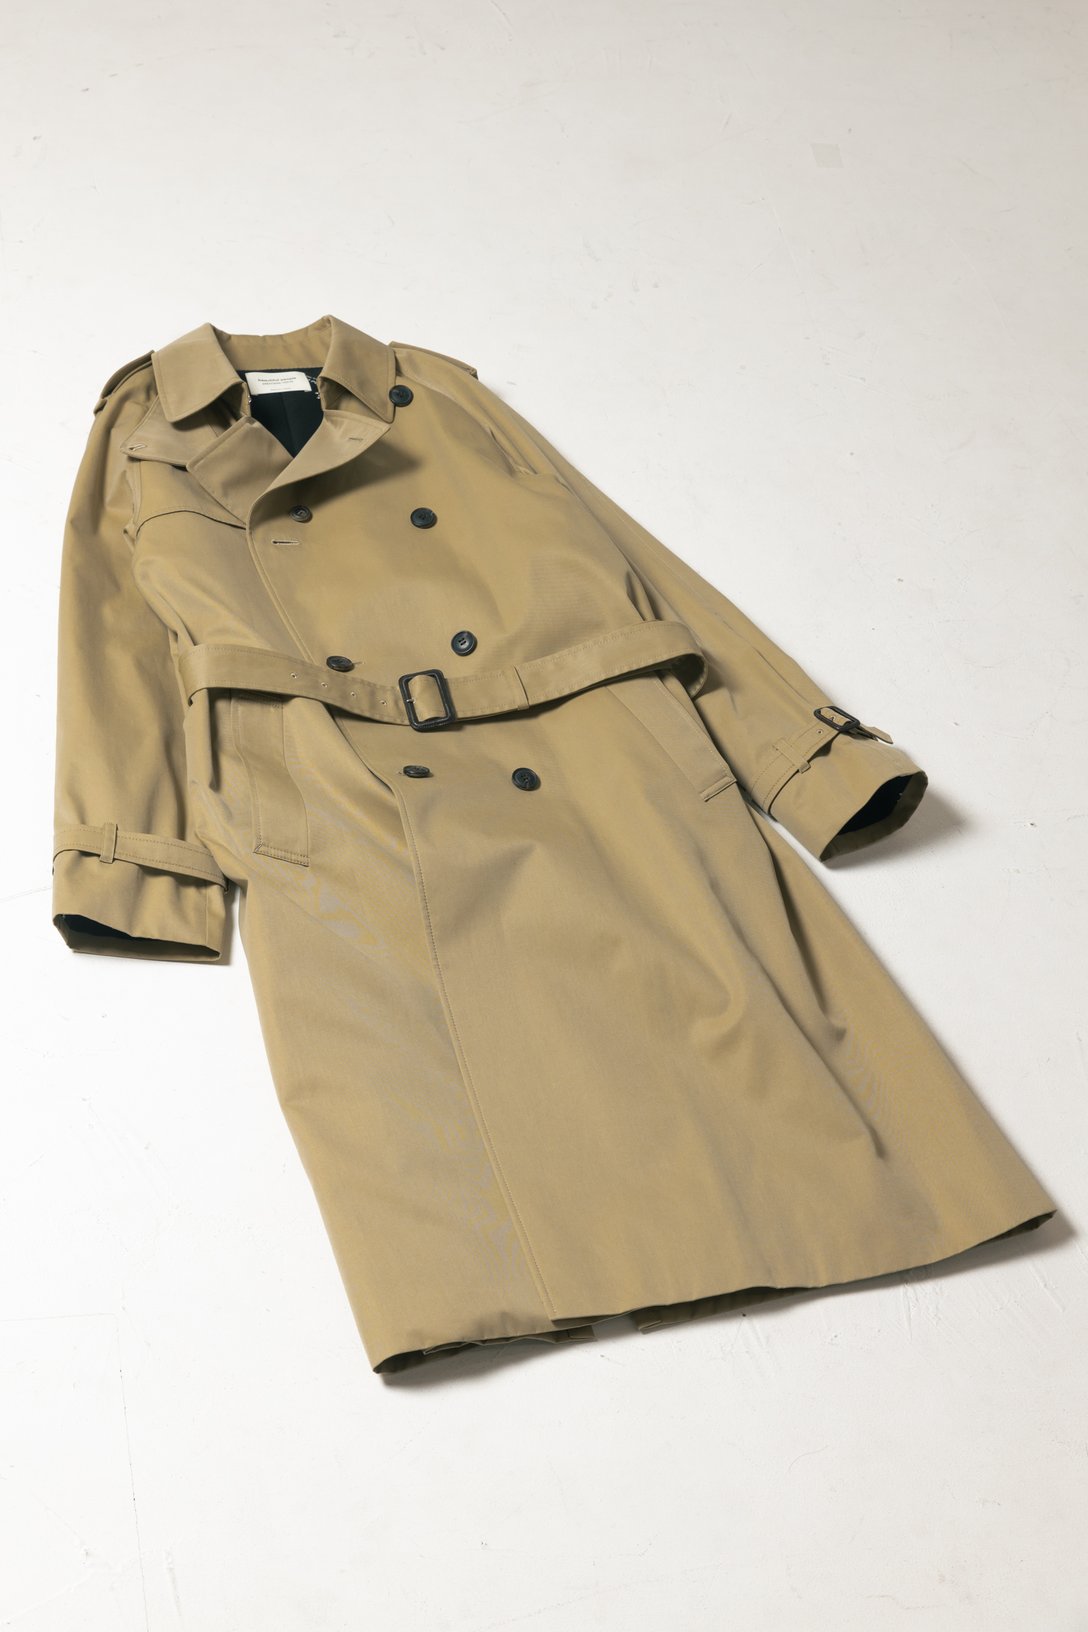 ultimate pima THE / a trench coat（税込14万9600円） Image by FASHIONSNAP